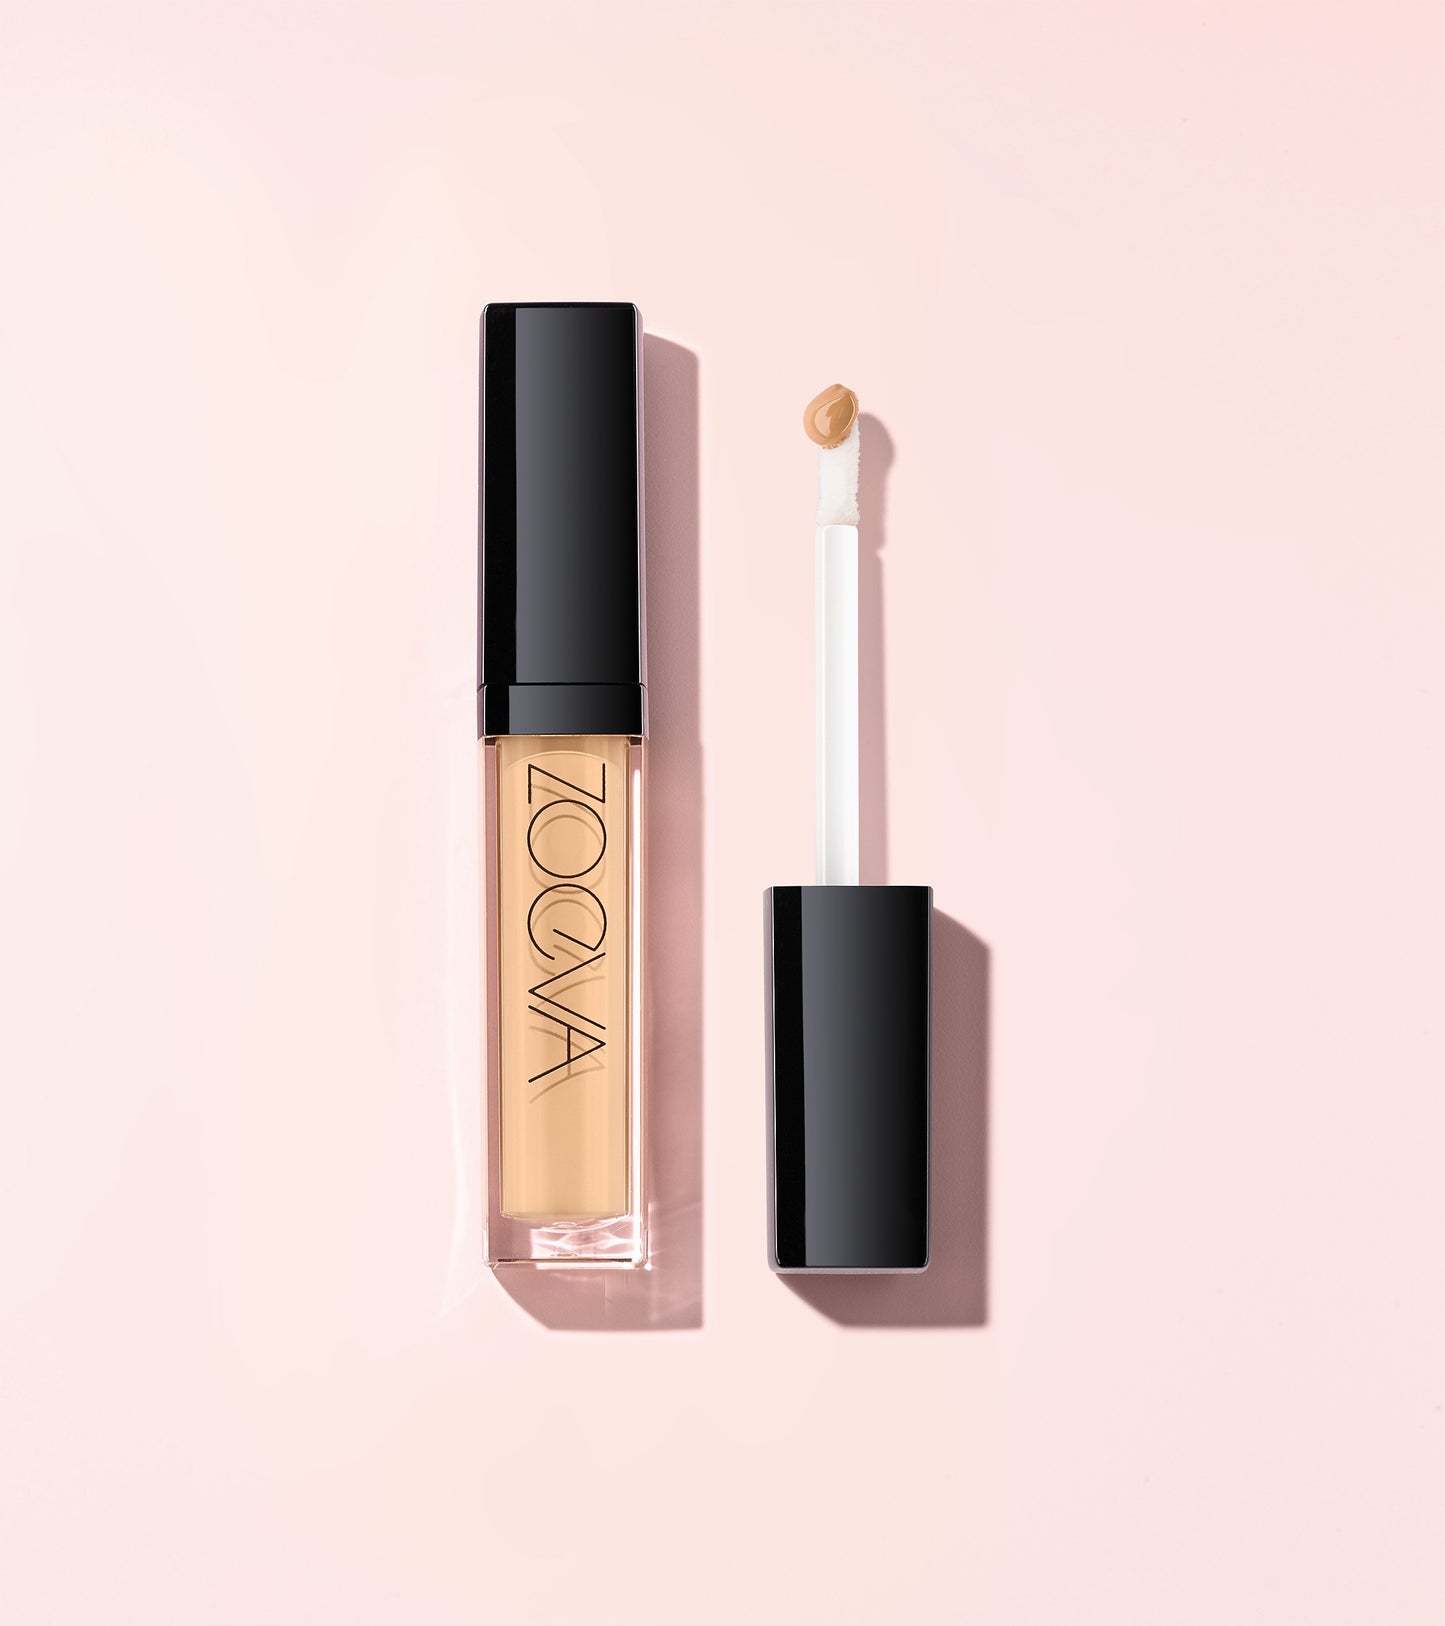 AUTHENTIK SKIN PERFECTOR CONCEALER (180 OFFICIAL) Expanded Image 1